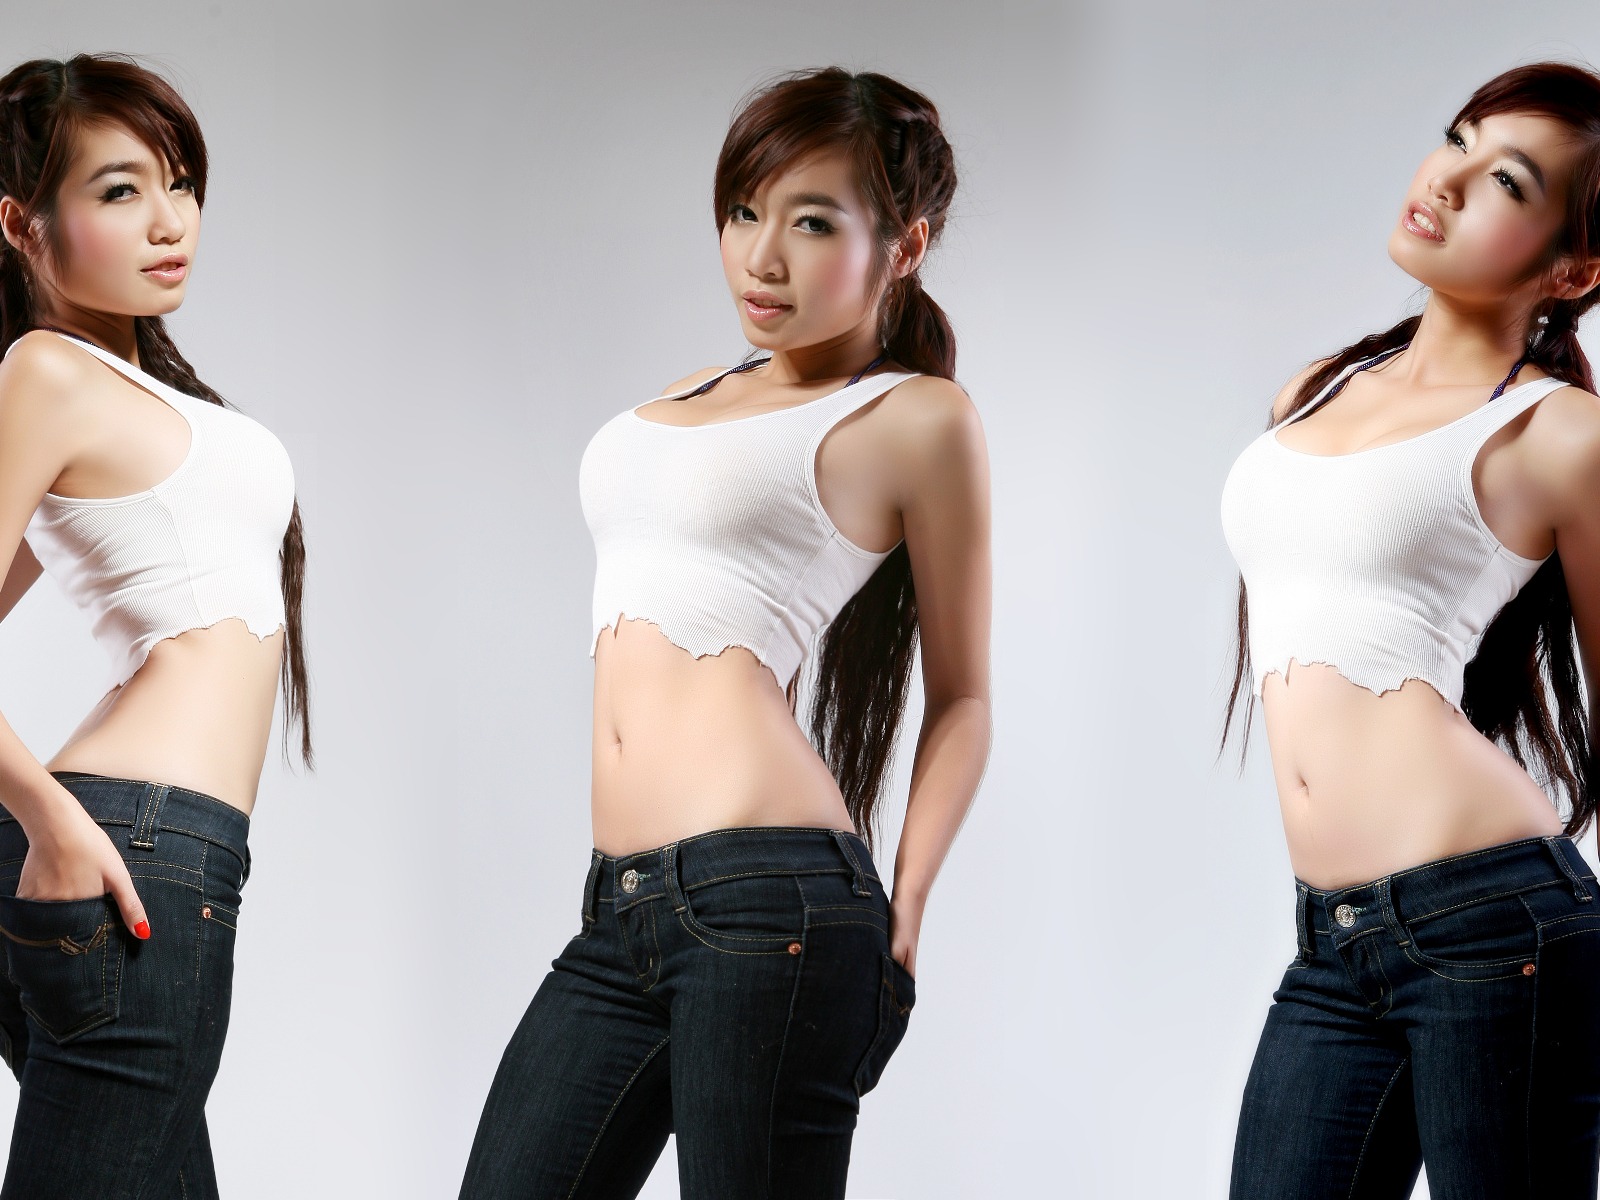 Widescreen Wallpaper Collection actrice (8) #5 - 1600x1200